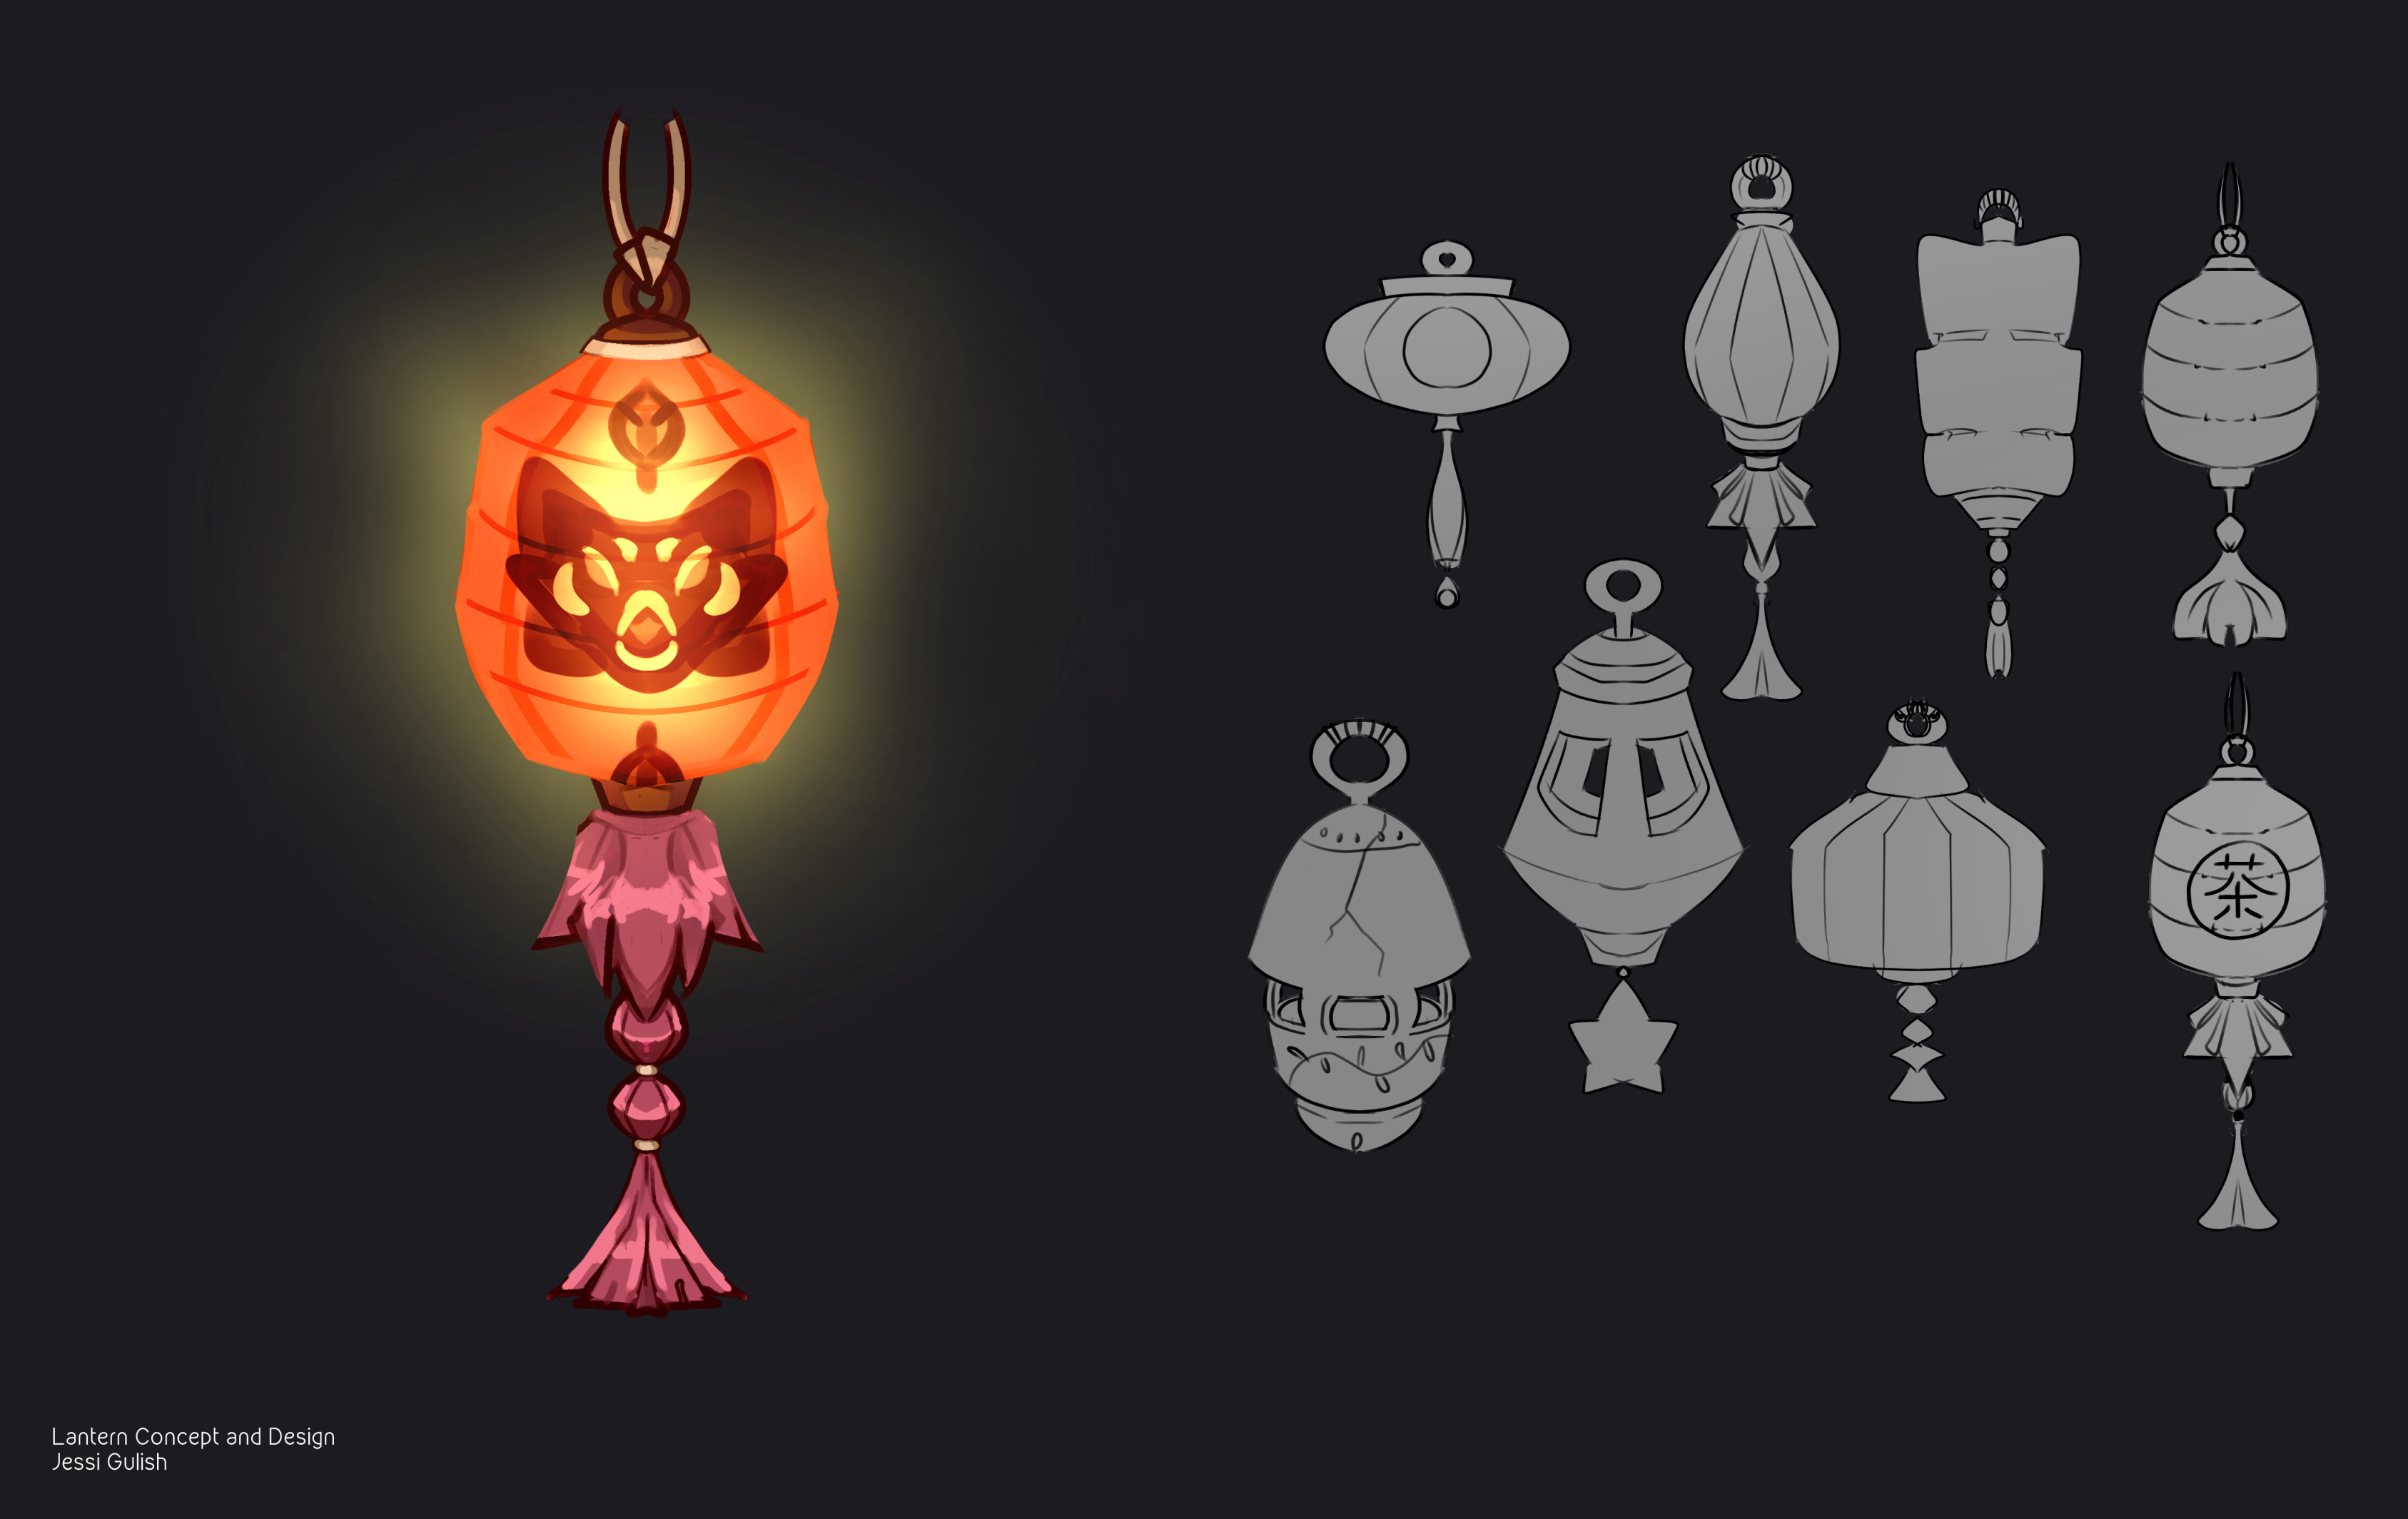 Lantern sketches and concept